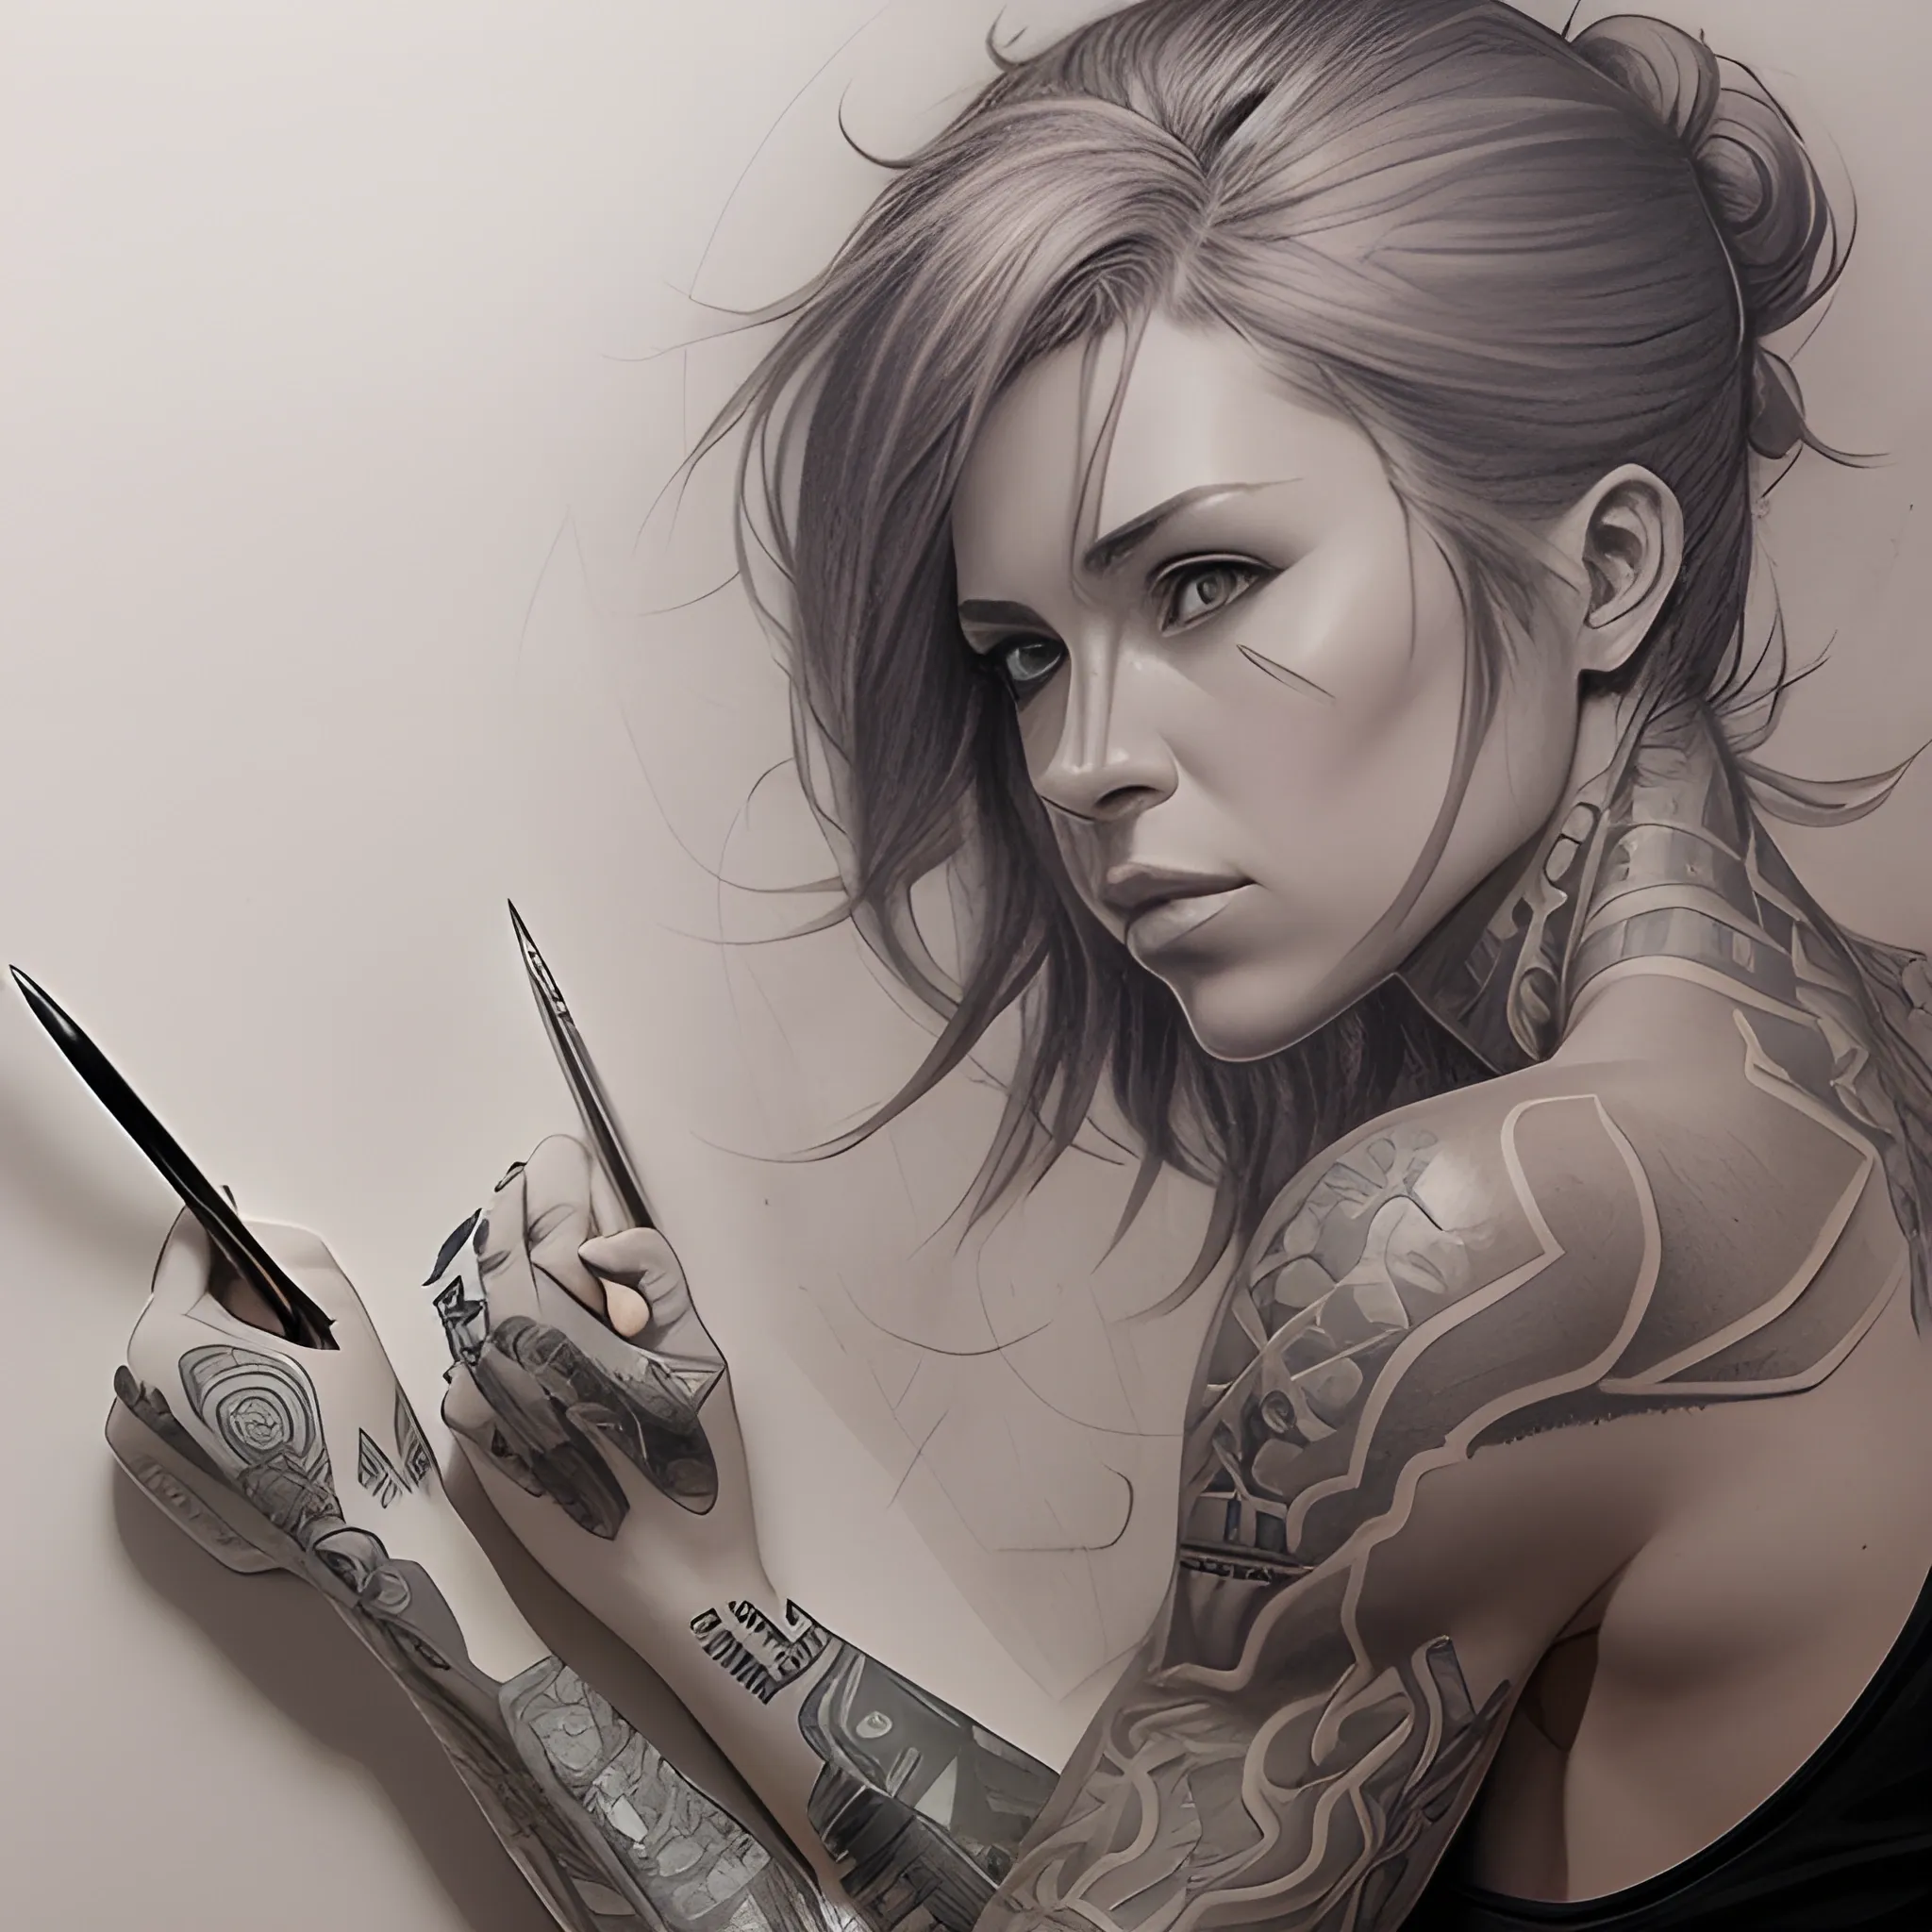 Discover more than 75 tattoo pencil sketches